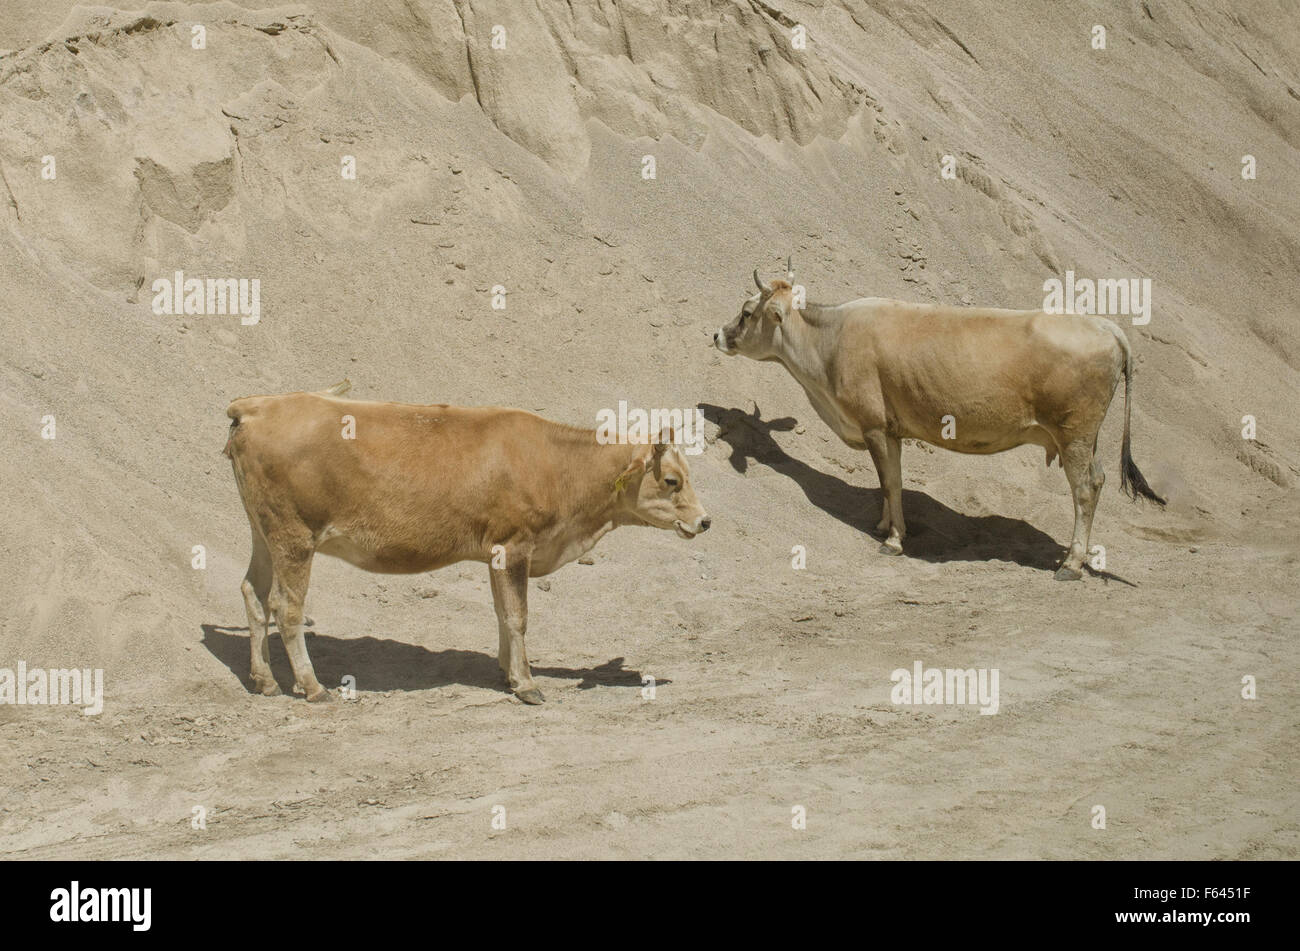 Yellow Cows on sand Stock Photo